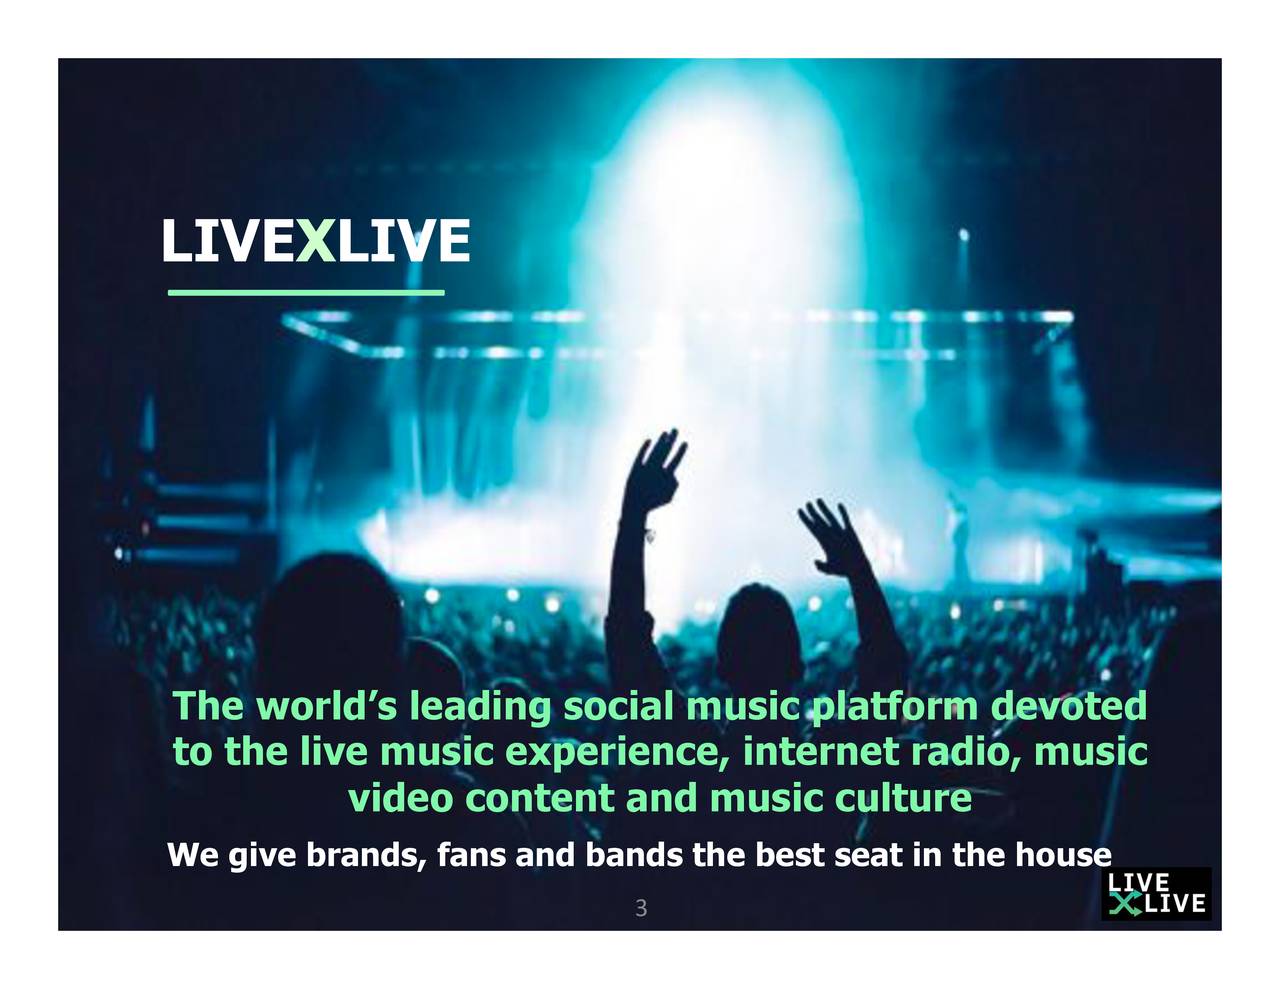 livexlive apps